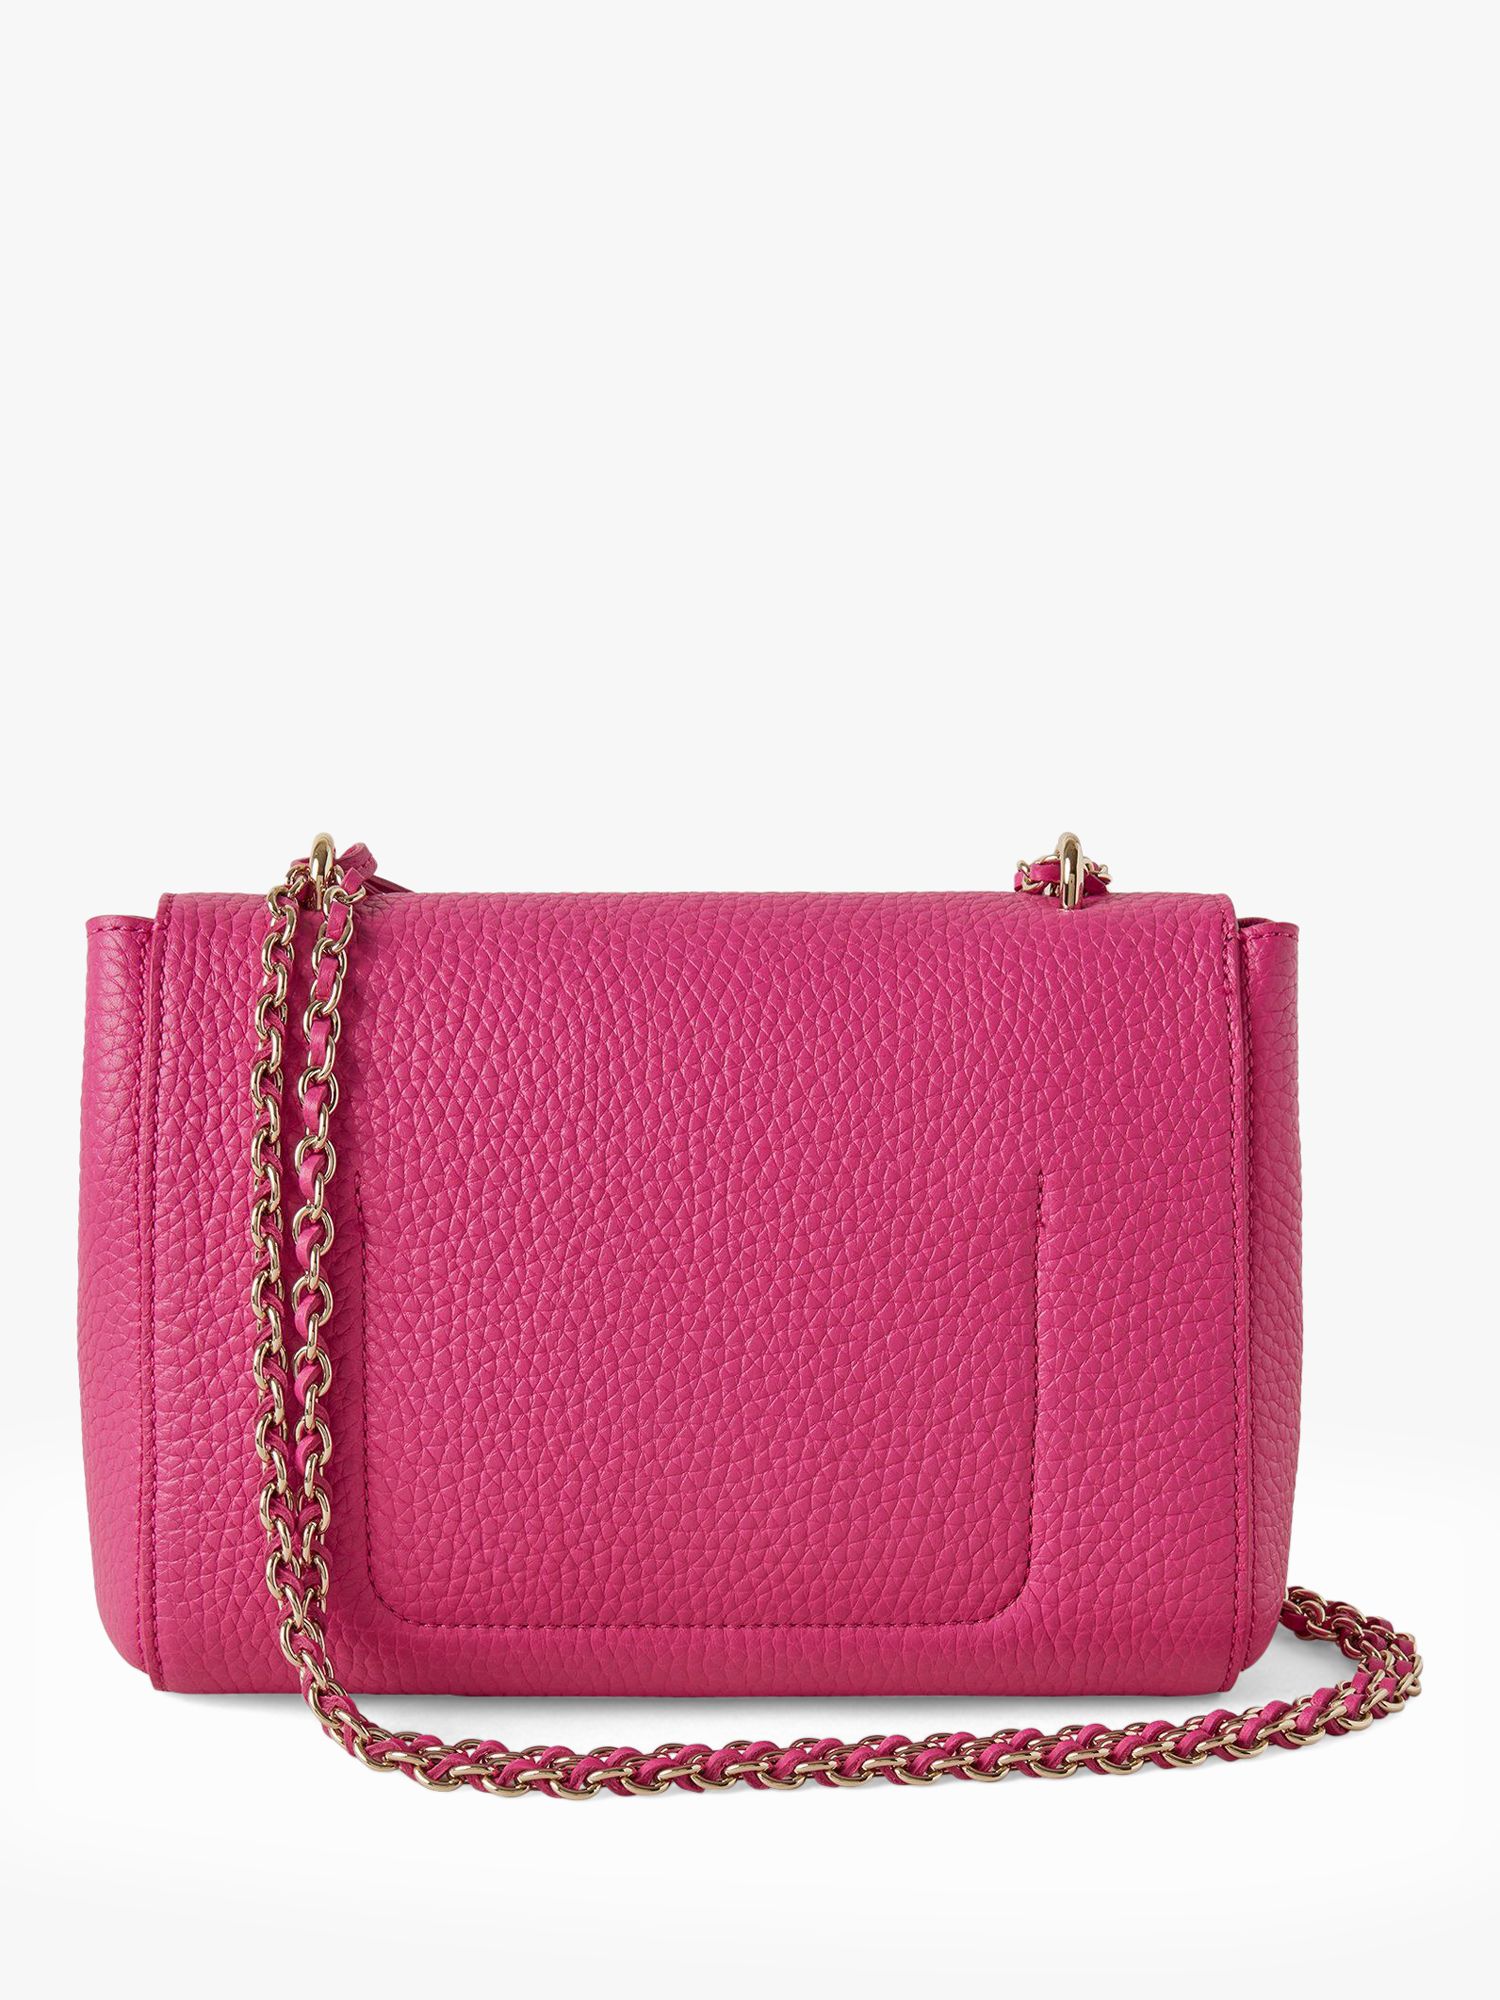 Mulberry Lily Heavy Grain Leather Shoulder Bag, Mulberry Pink at John ...